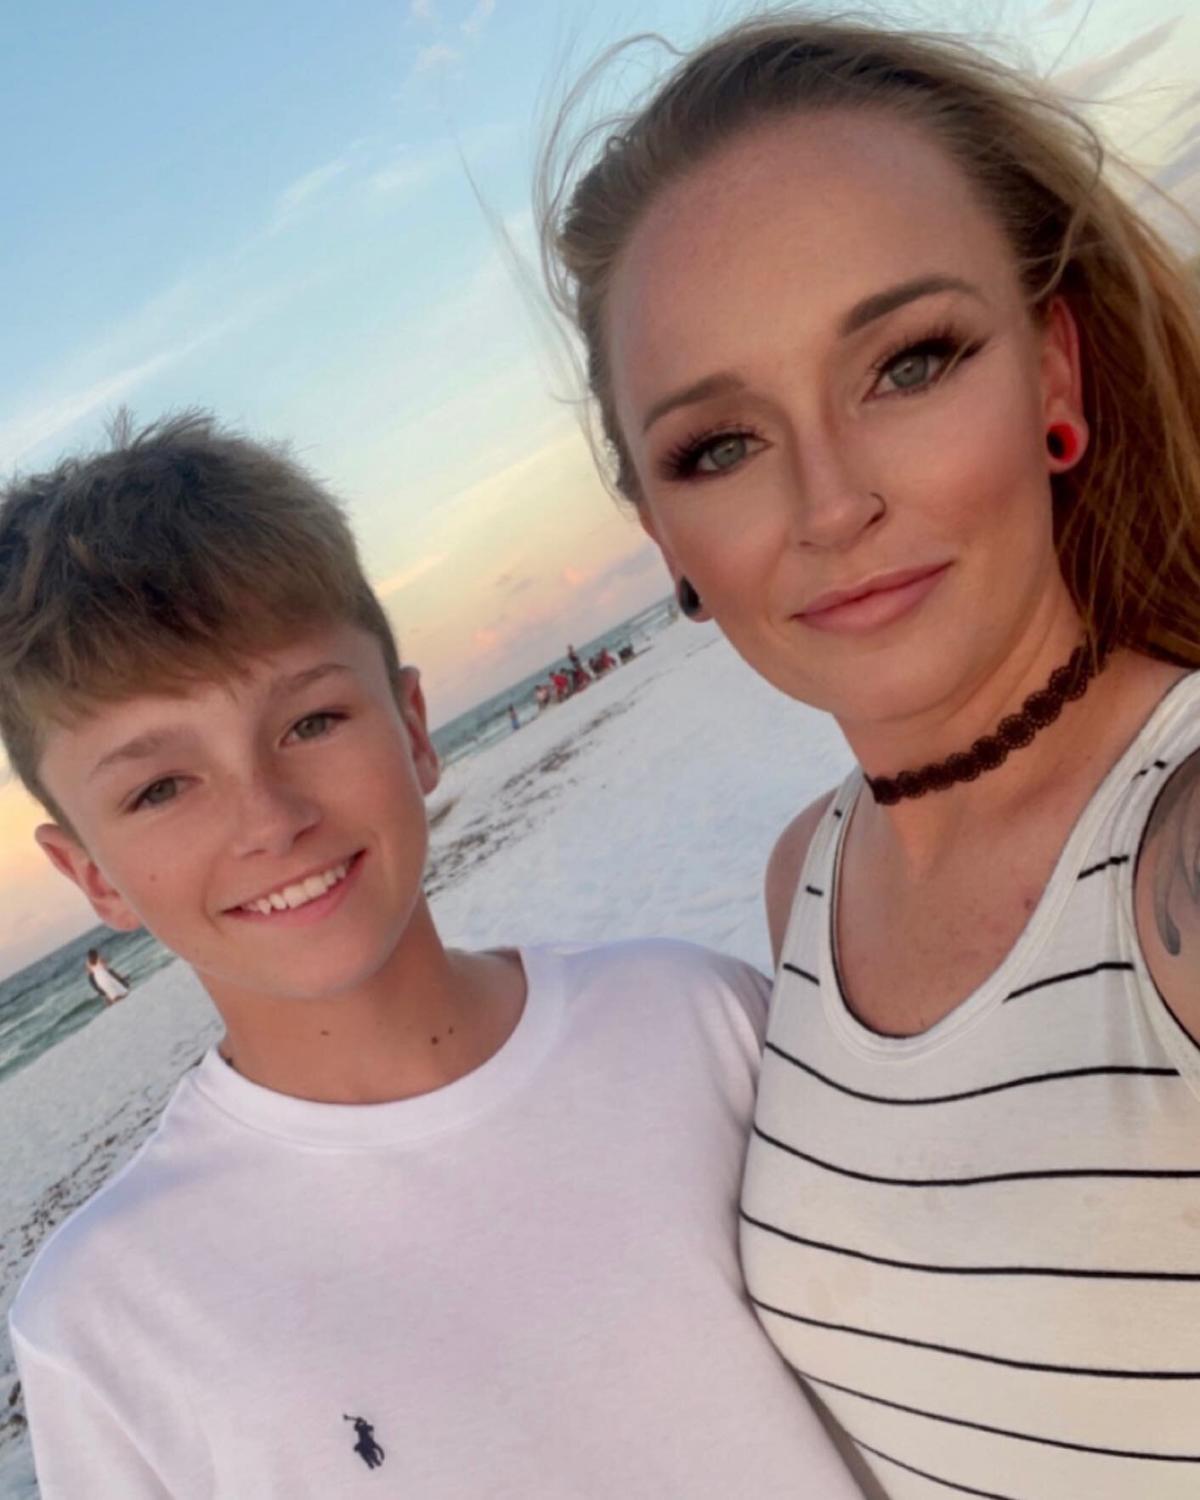 Maci Bookout Says Teen Years with Son Bentley Are an ‘Absolute Blast’ and an ‘Absolute Struggle’